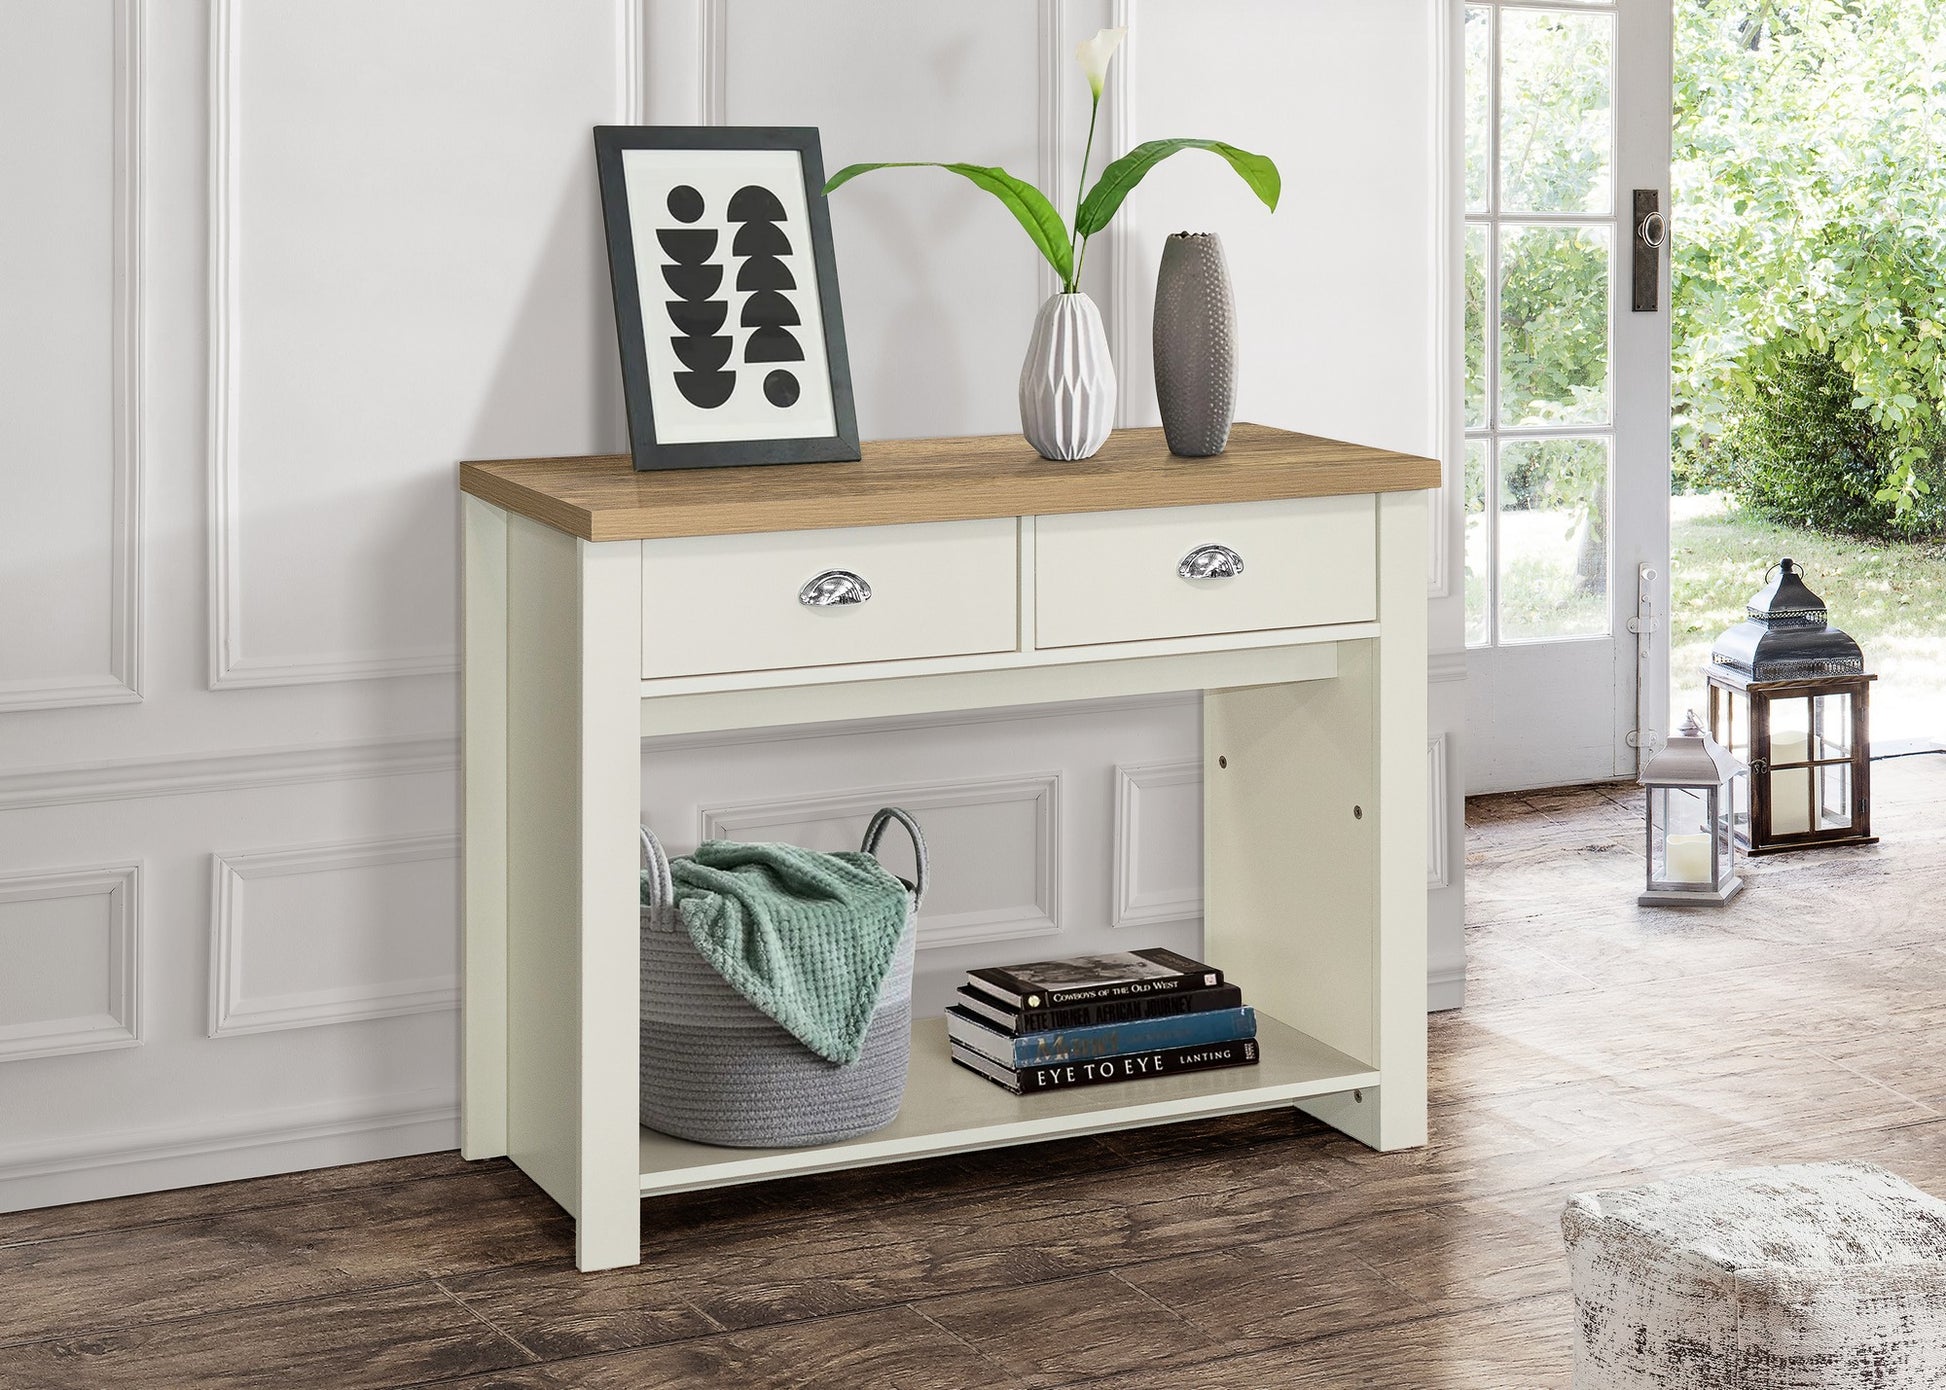 Highgate 2 Drawer Console Table - Classic Farmhouse Inspired, Modern Practical Affordable Furniture with Stylish Silver Handles, Large Shelf Storage, Ideal for Hallways